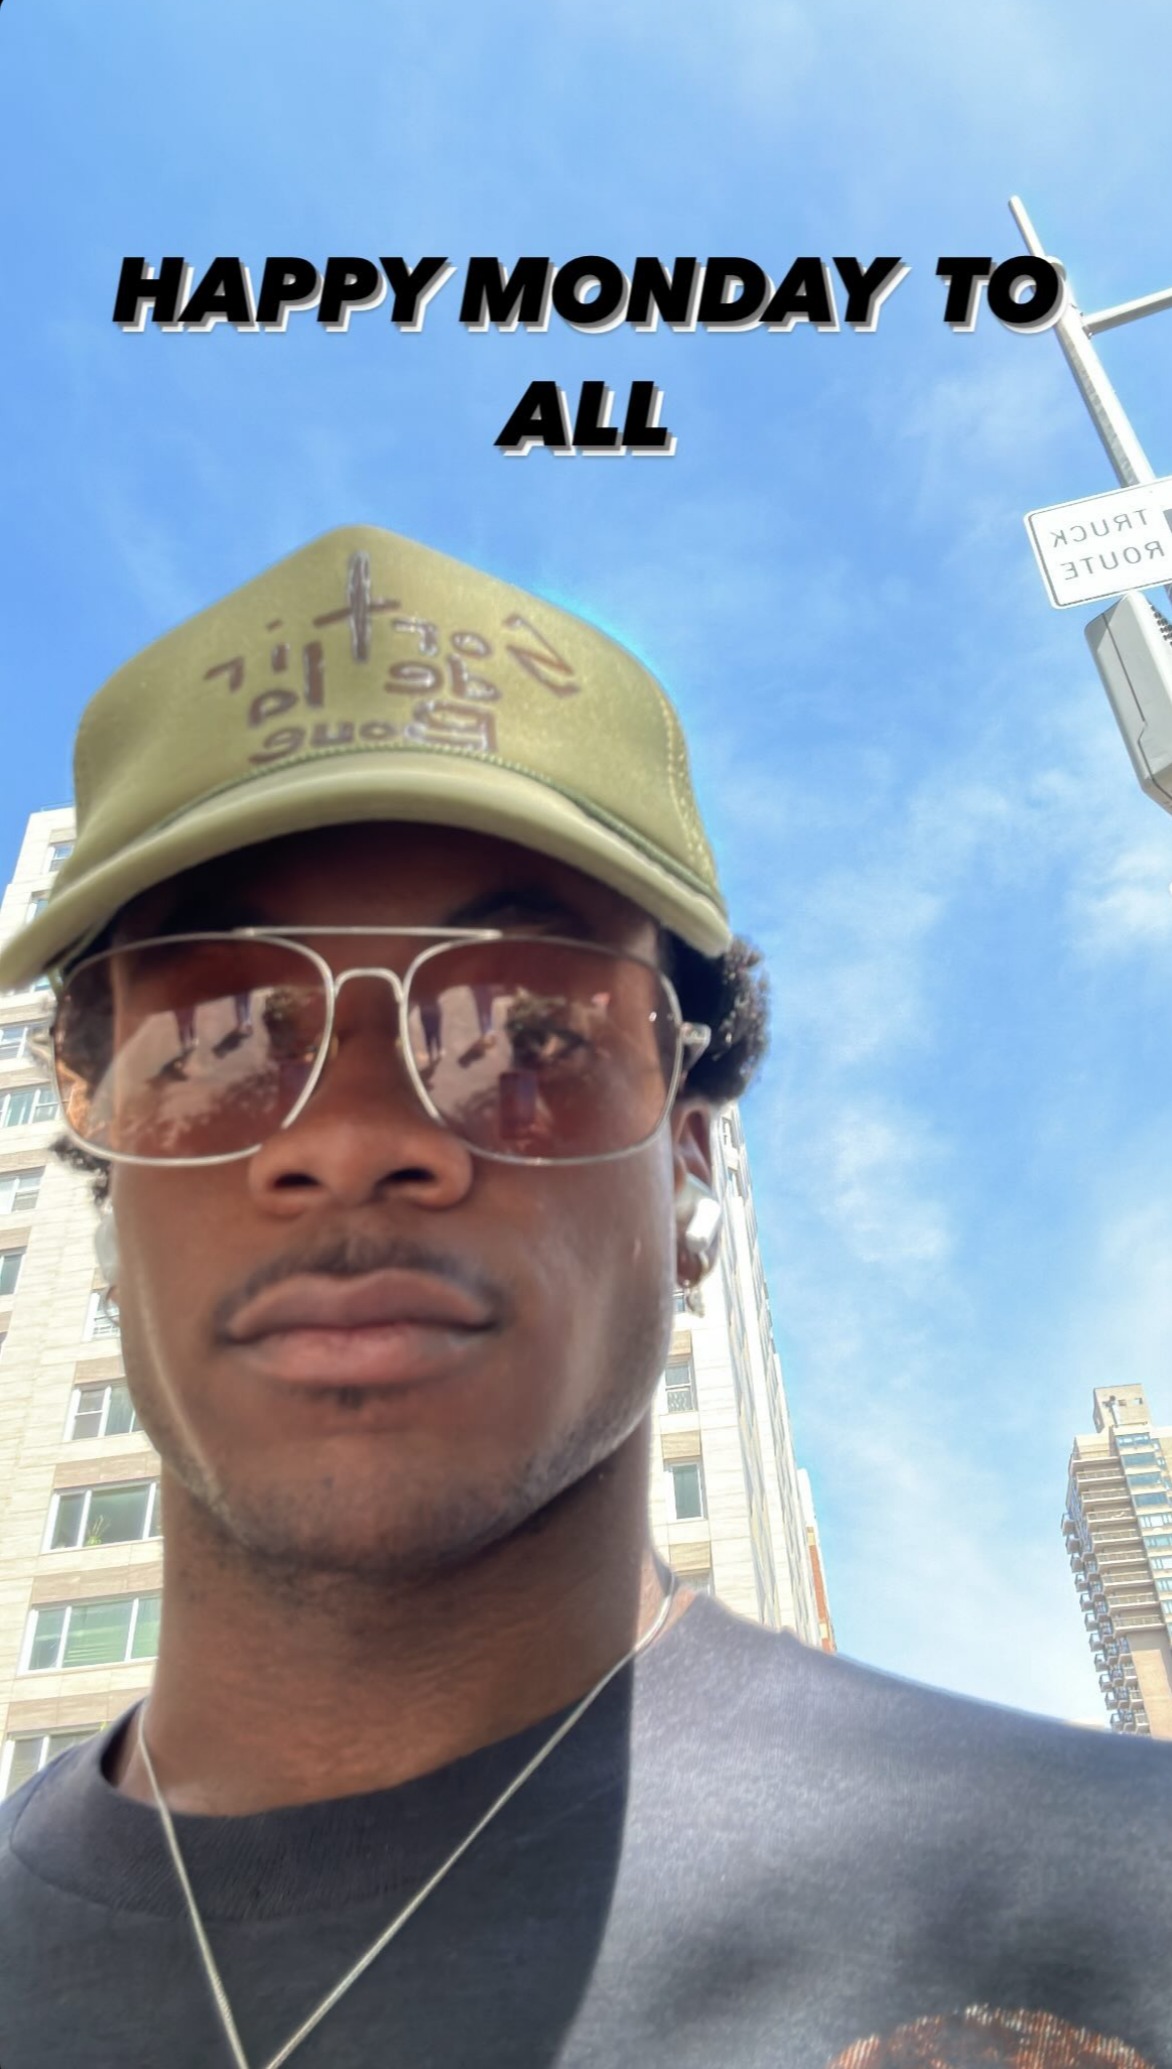 He shared a selfie from New York City on the same day